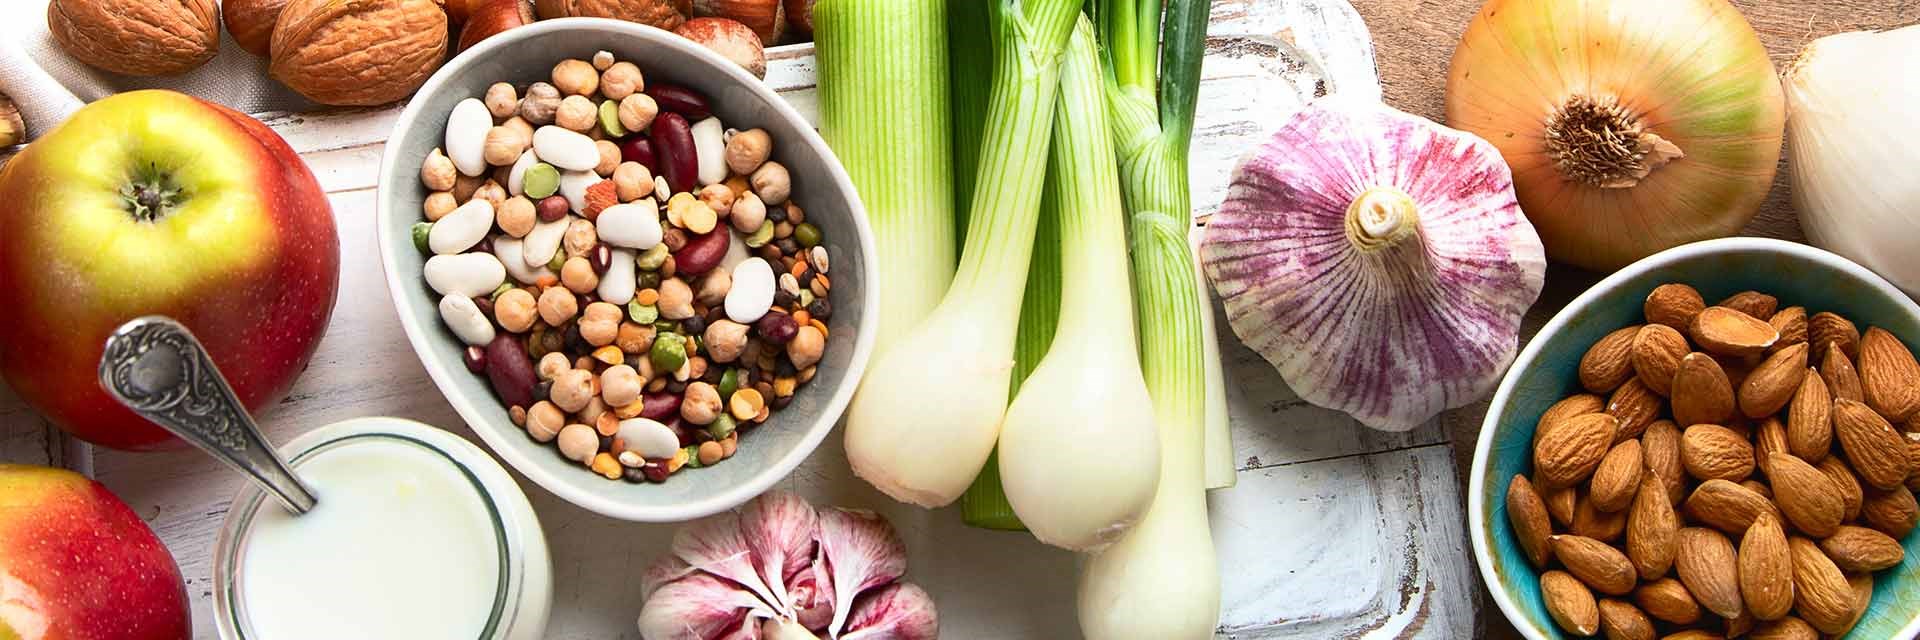 A selection of prebiotic foods, such as onions, garlic, seeds and nuts